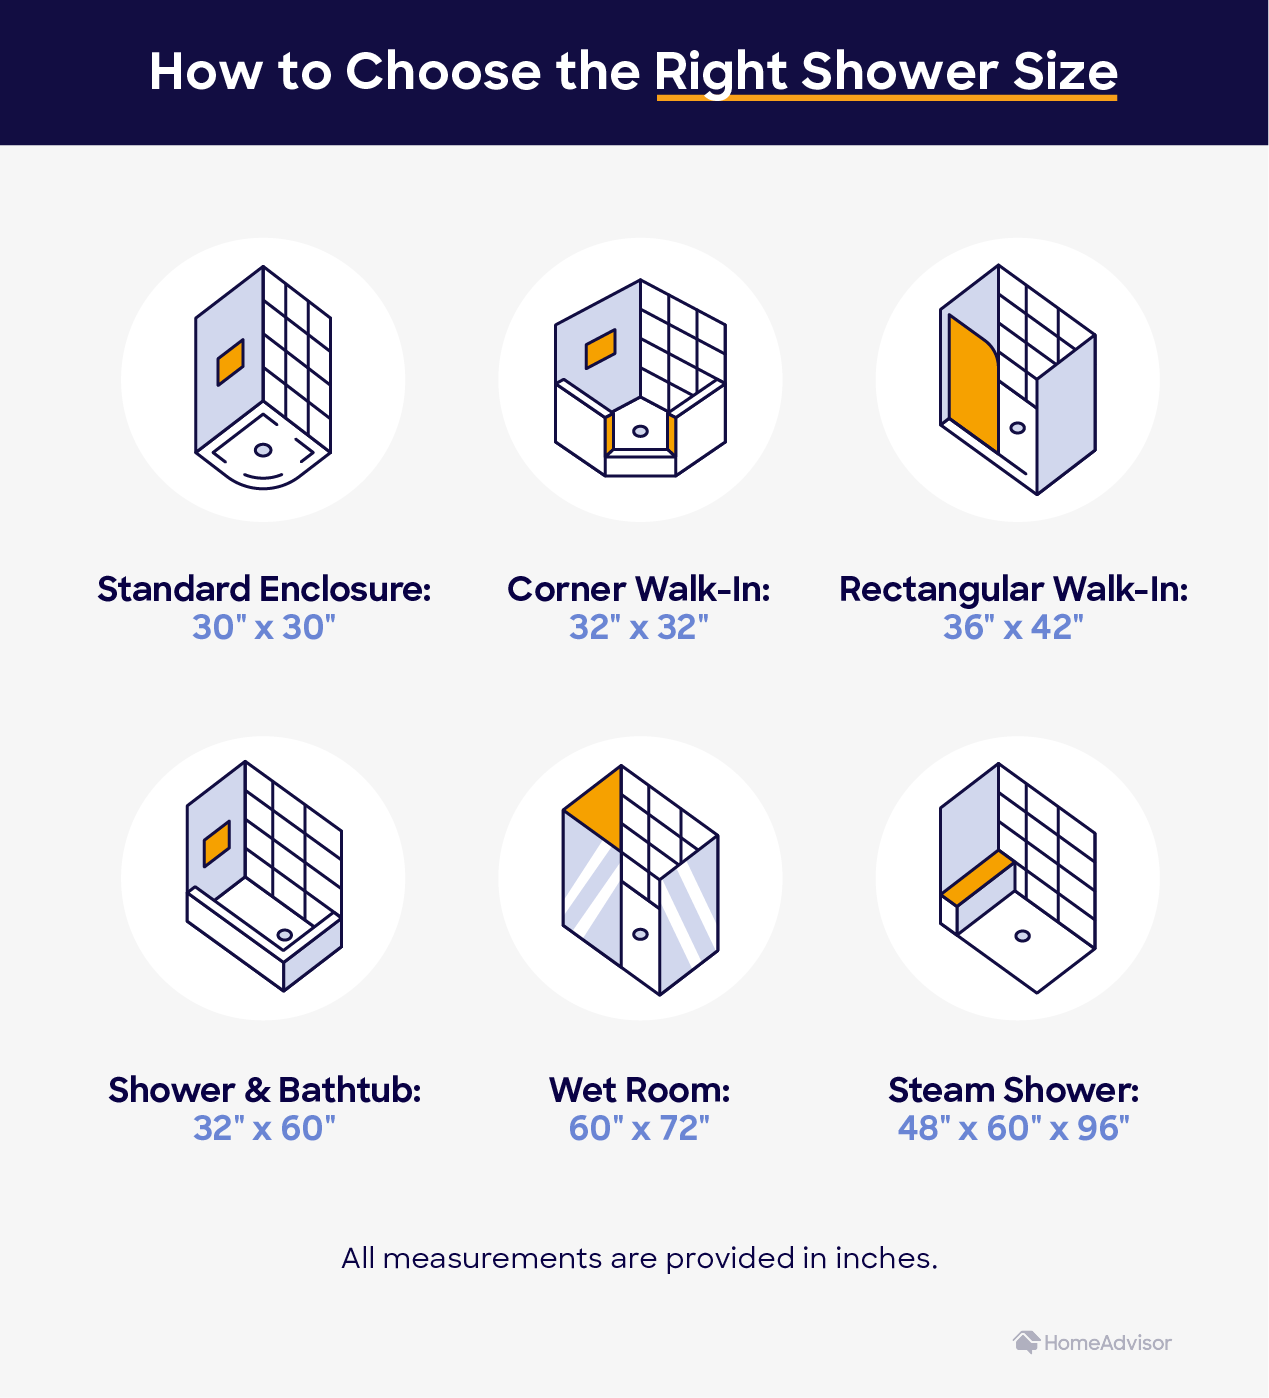 Shower size chart: what is the standard shower size by type?